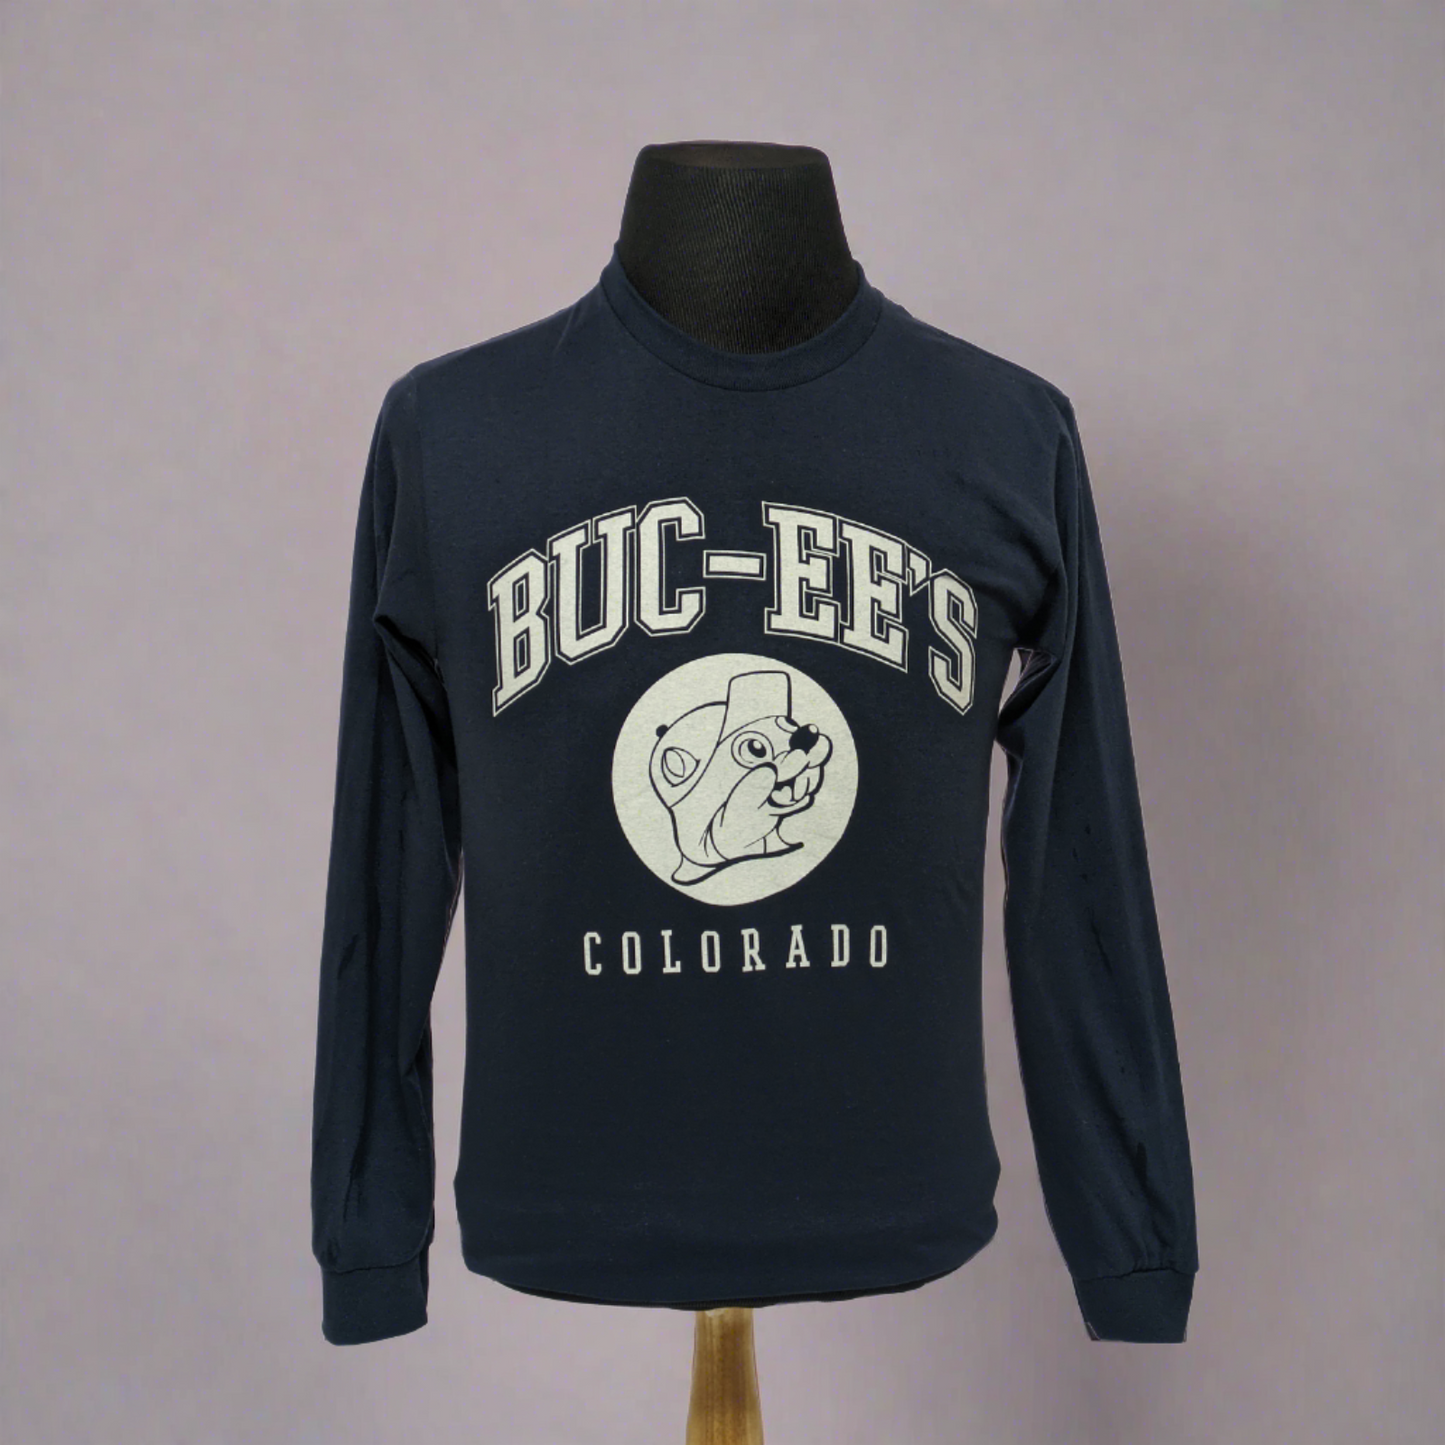 This is a long-sleeved Buc-ee's t-shirt in dark blue. It has bold white text that read "BUC-EE'S" followed by a white Buc-ee's logo, and then in smaller lettering, still in bold the word "COLORADO"